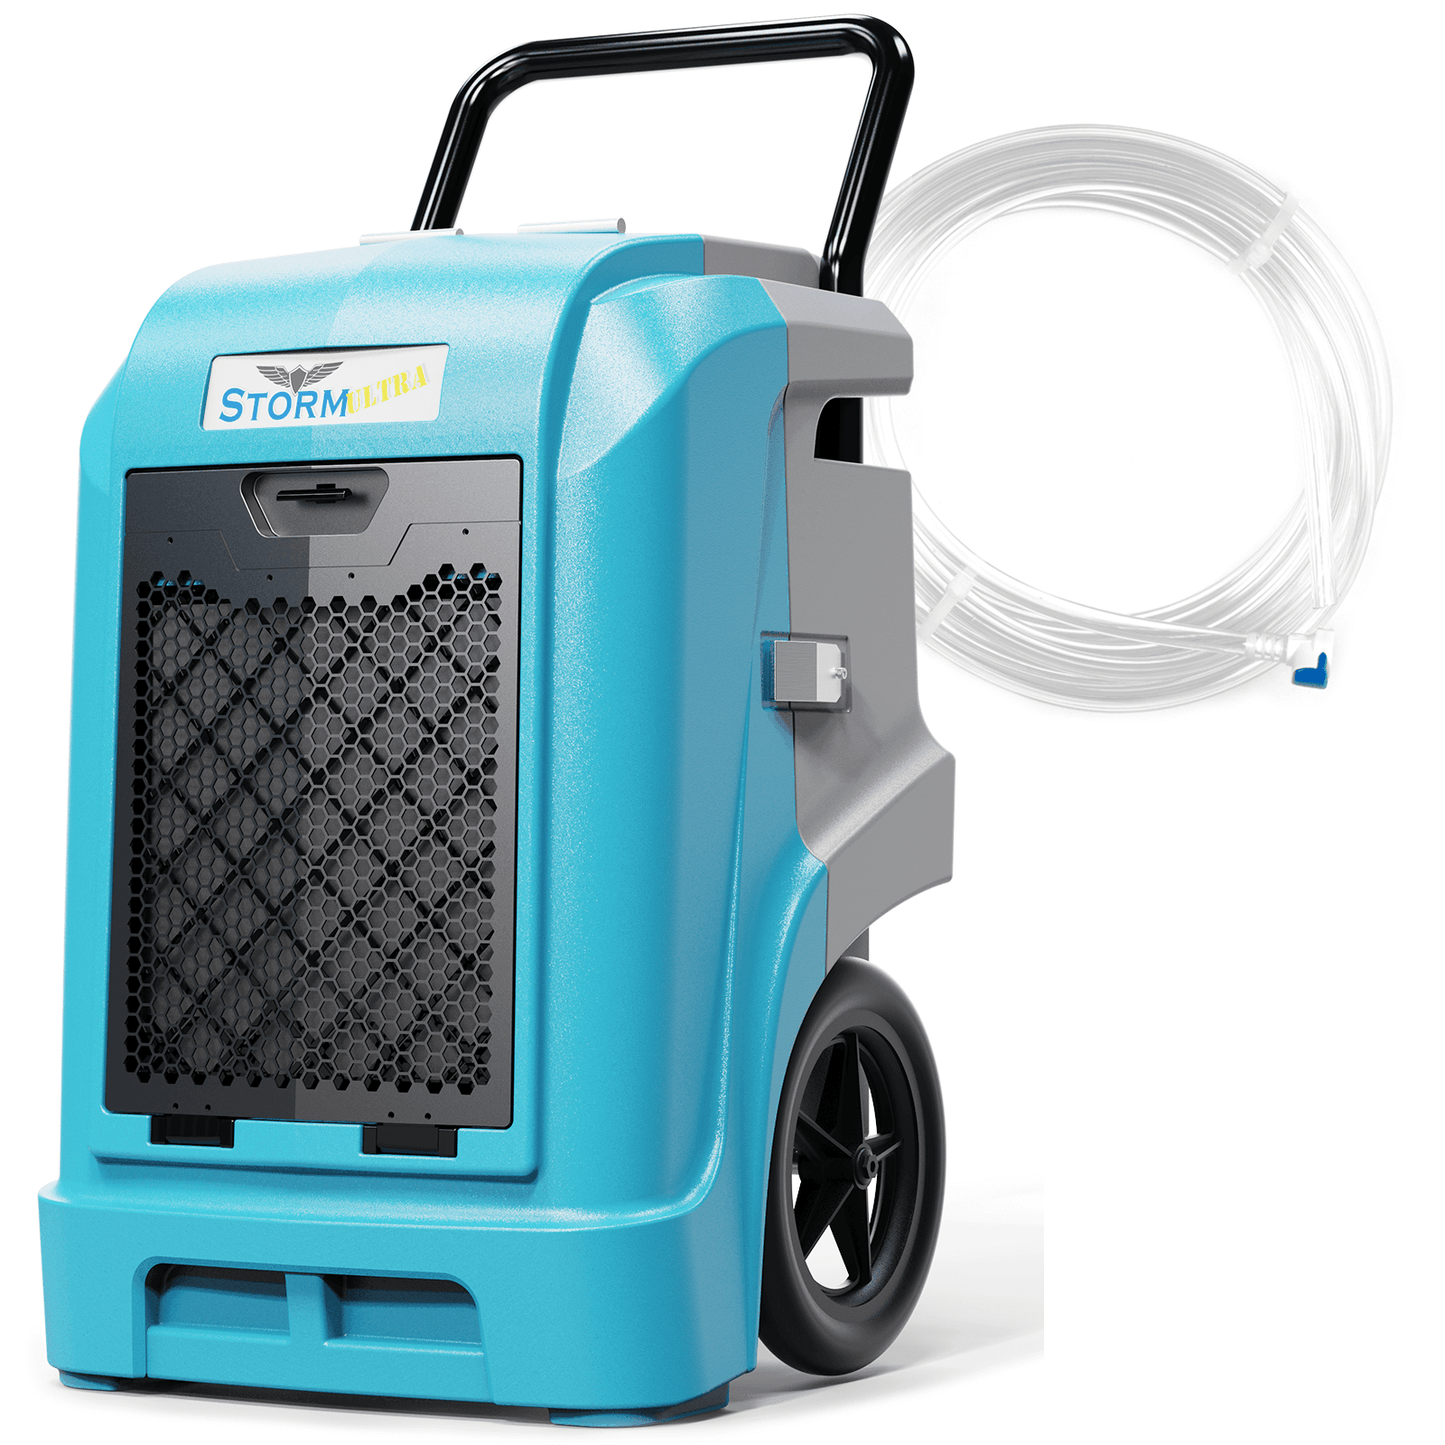 AlorAir Storm Ultra LGR Smart Wi-Fi 190 PPD 2,600 sq. ft. Large Commercial Dehumidifier